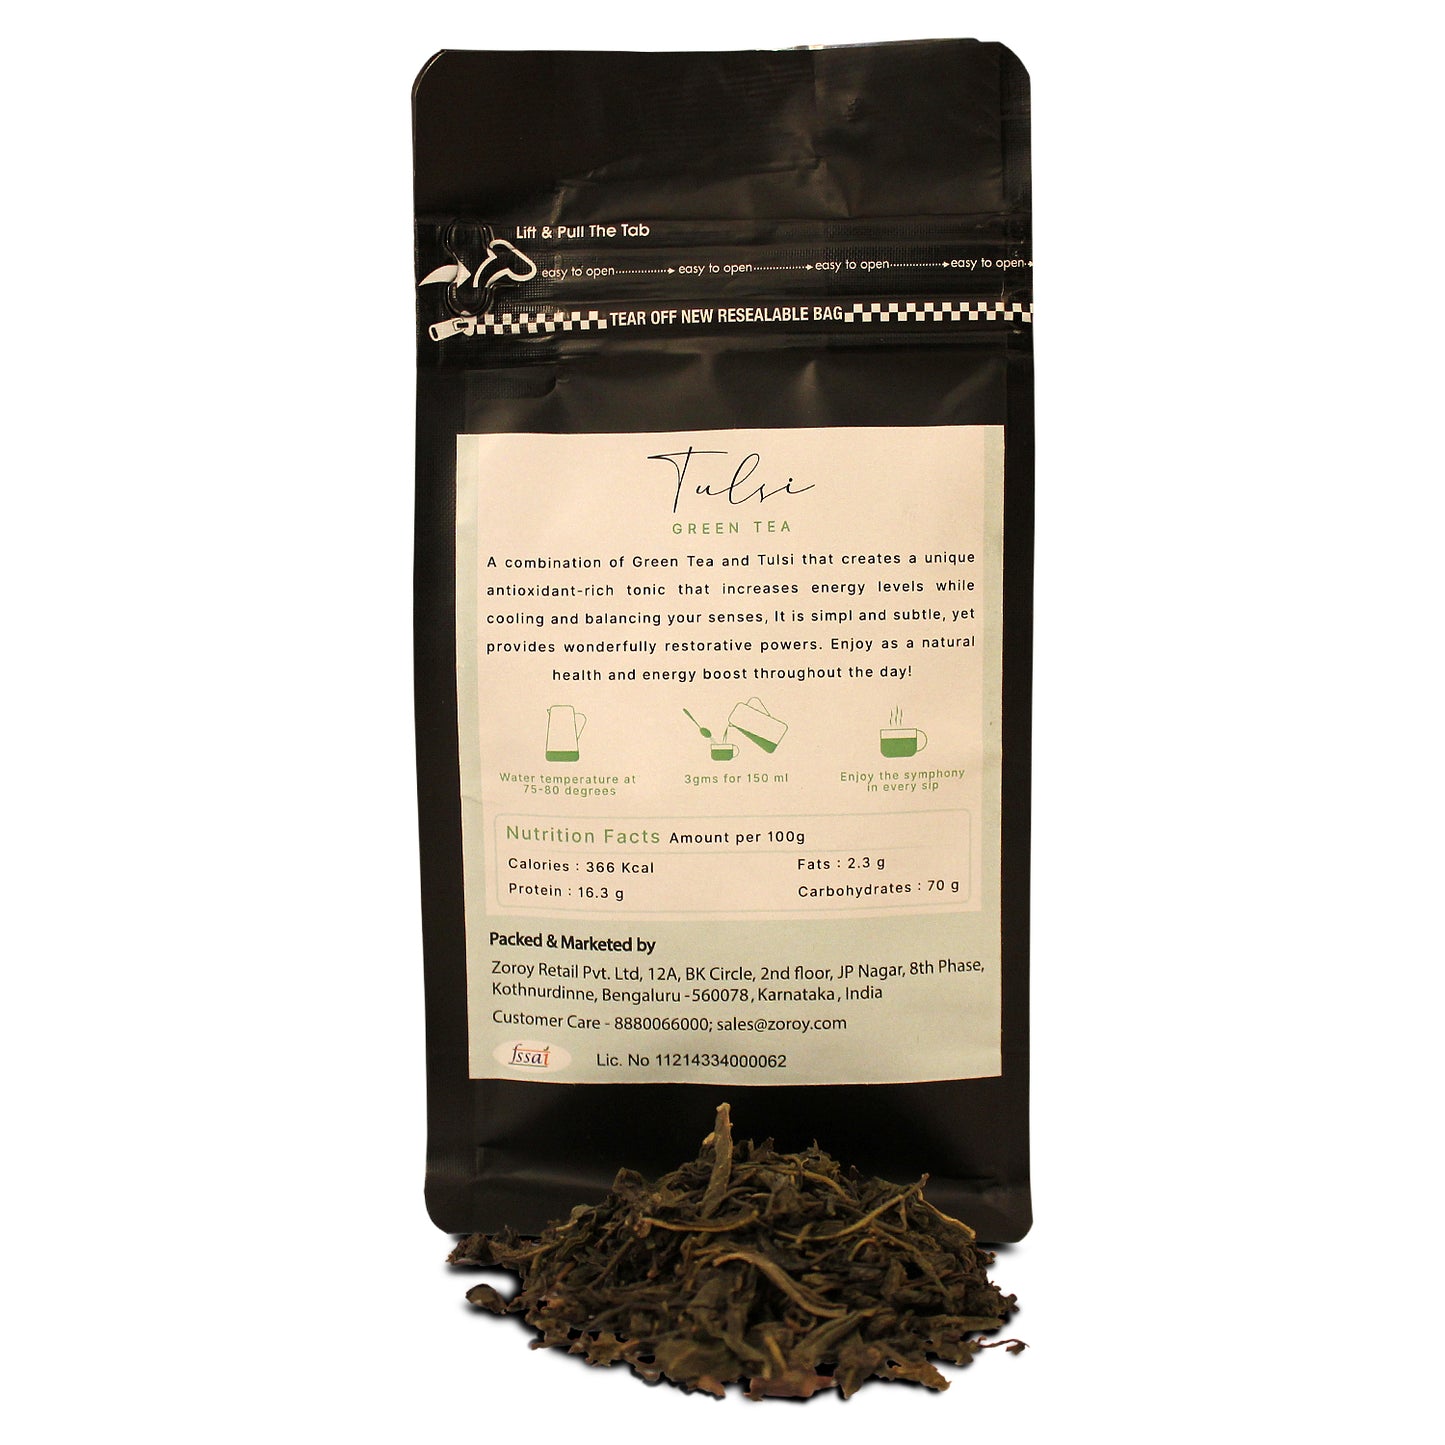 ZOROY THE FINESSE Tulsi Green tea | 100% Natural Herbal Detox | No Flavours, no oils no essences | No Additives | Rejuvinating Tulsi chai | Anti Oxidant rich | Natural immunity Booster | 75 Gms